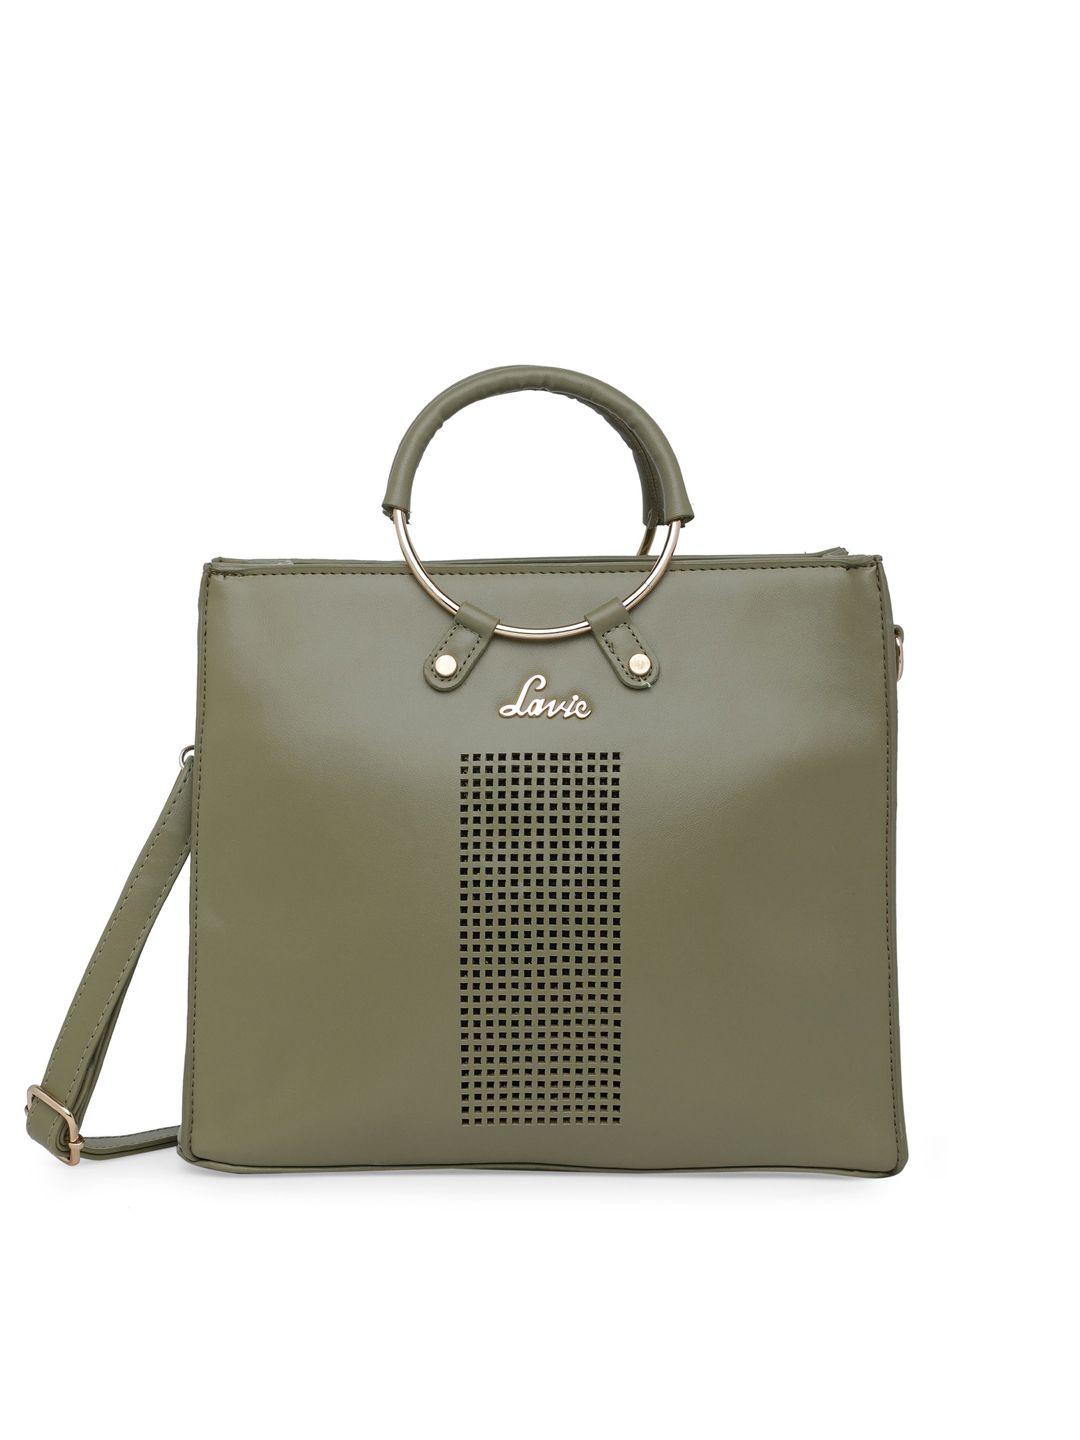 Lavie Olive Green Laser Cut Structured Handheld Bag with Detachable Sling Strap Price in India